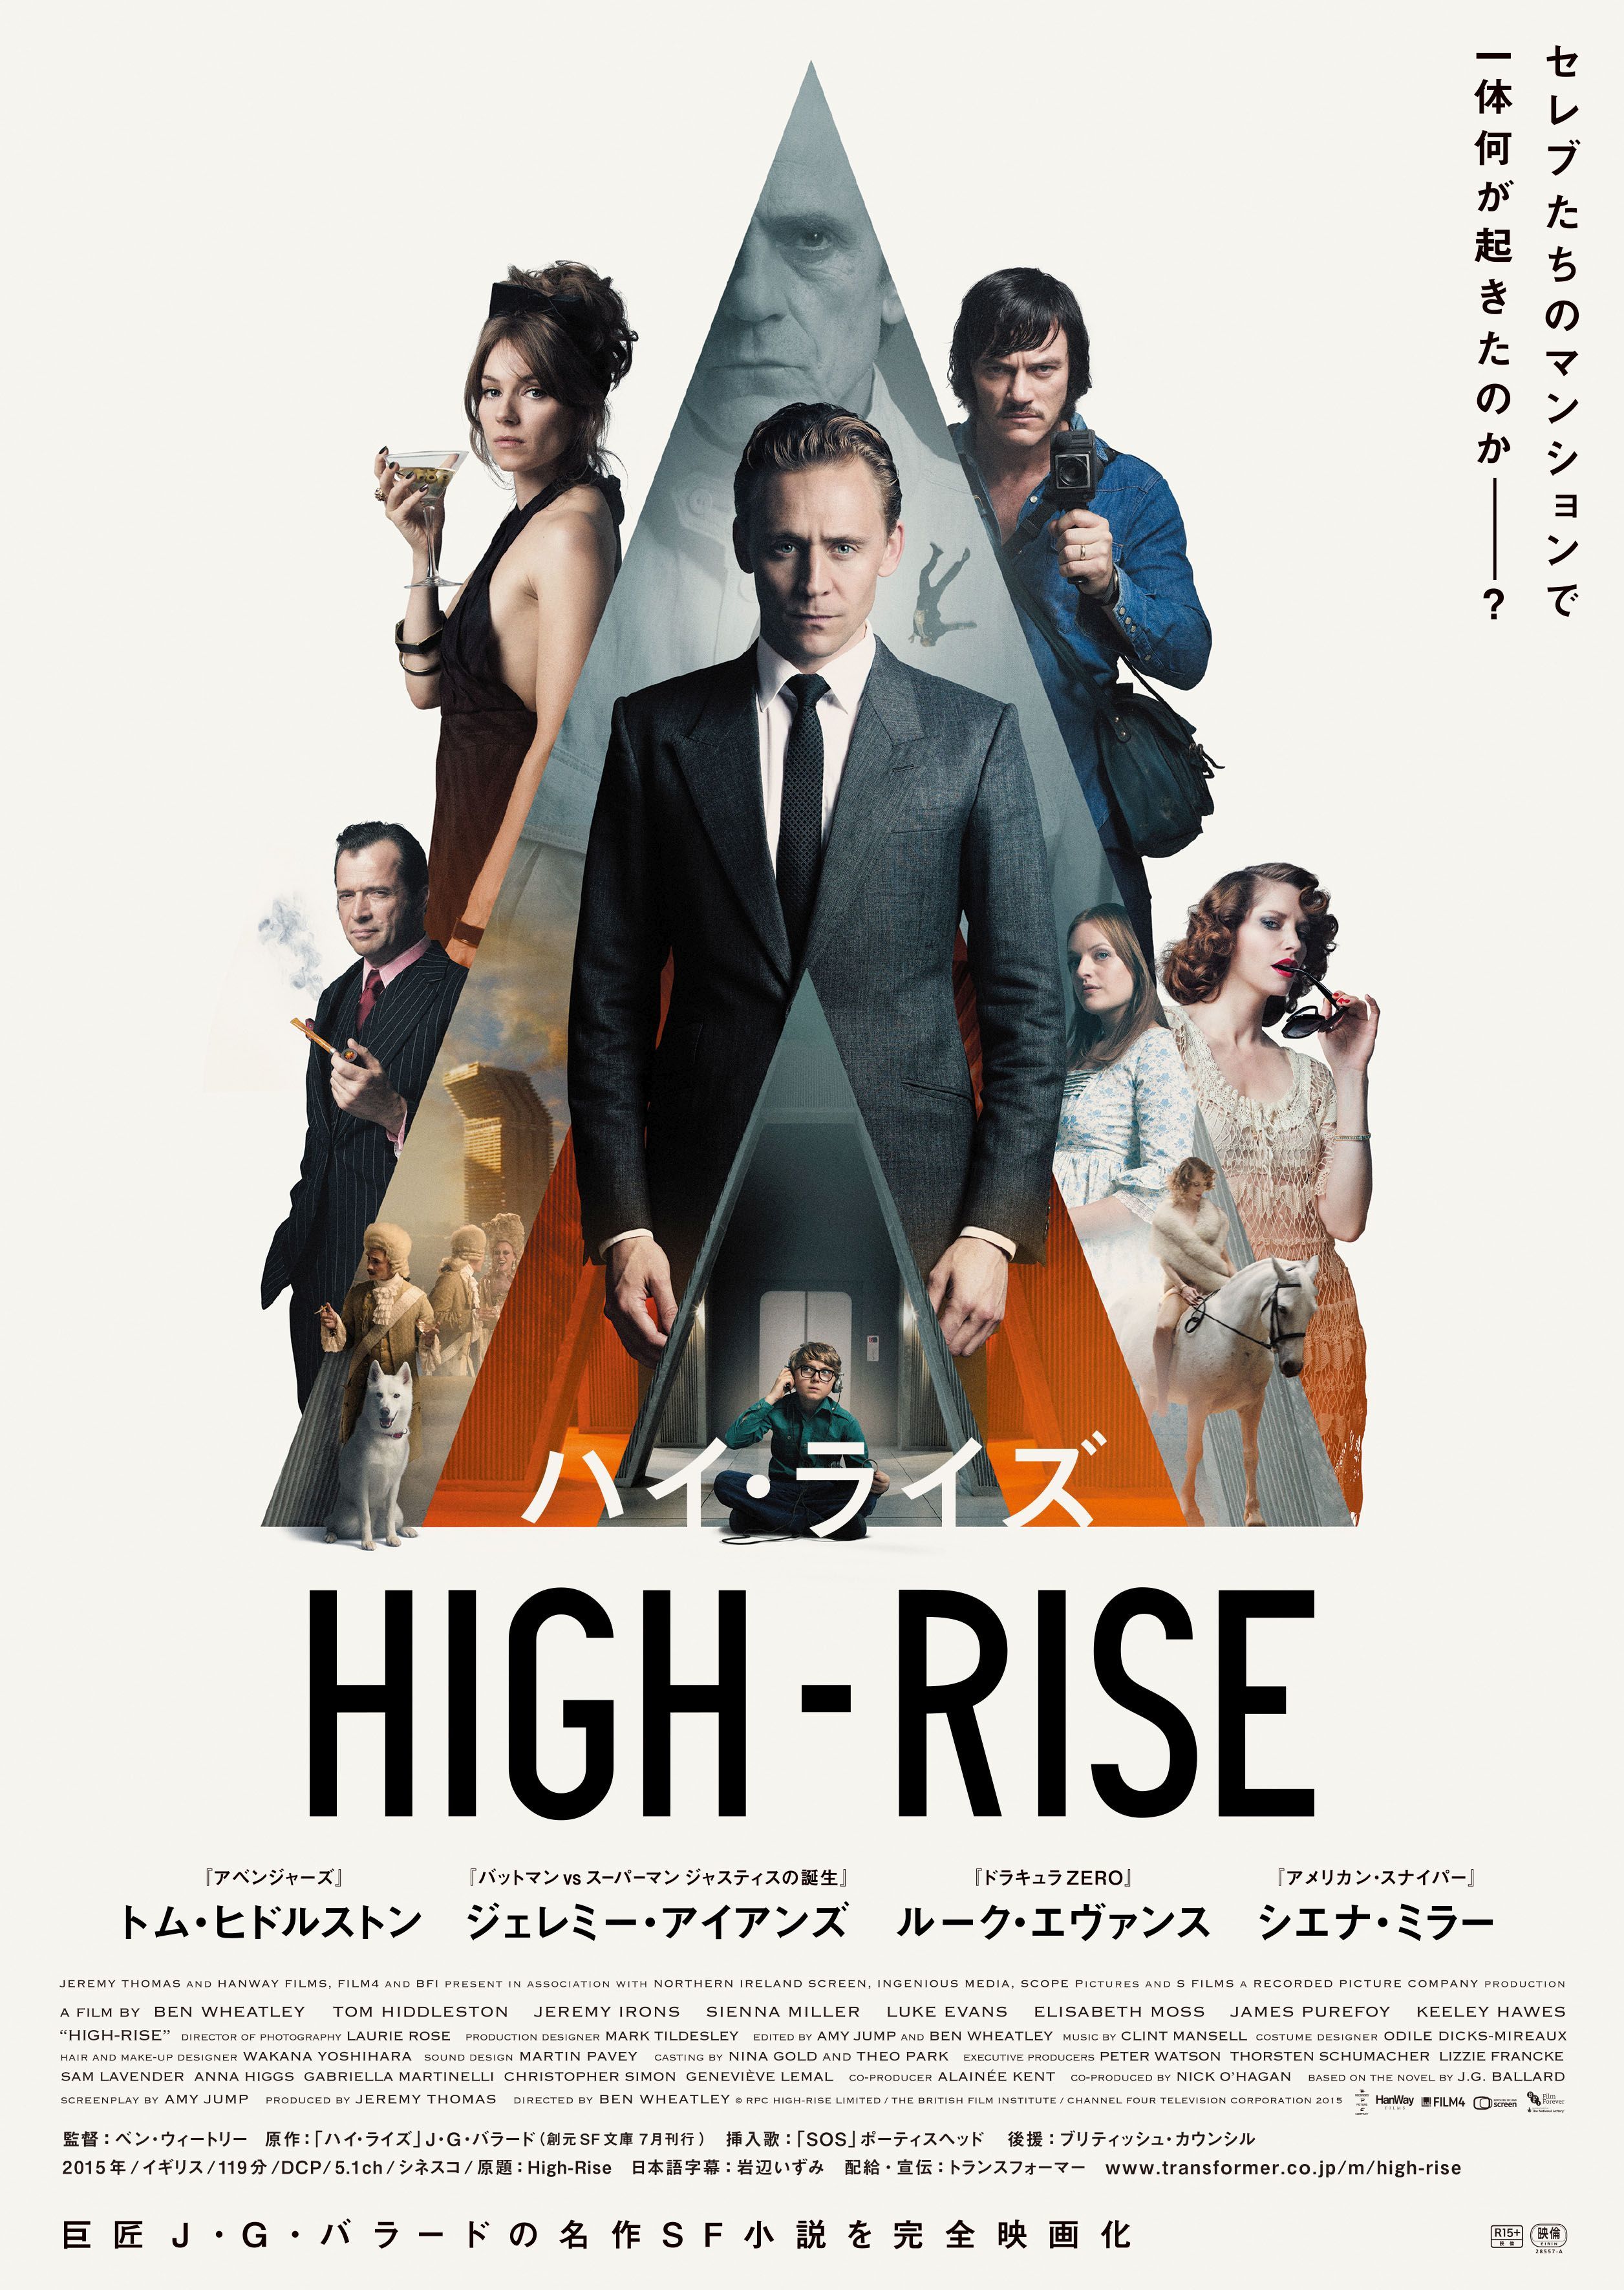 © RPC HIGH-RISE LIMITED / THE BRITISH FILM INSTITUTE / CHANNEL FOUR TELEVISION CORPORATION 2015